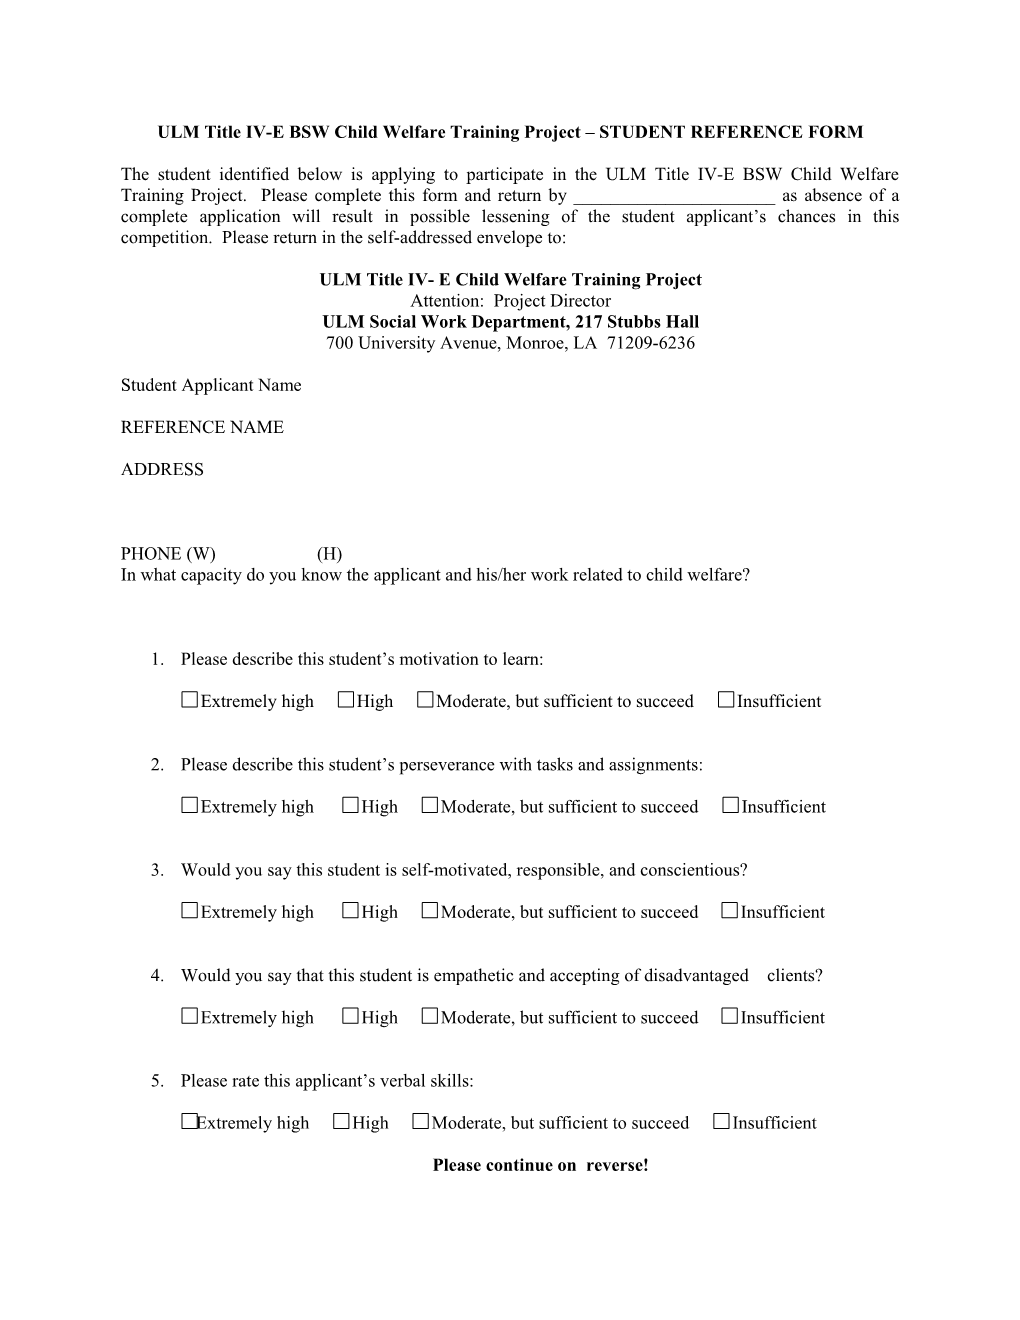 ULM Title IV-E BSW Child Welfare Training Project STUDENT REFERENCE FORM